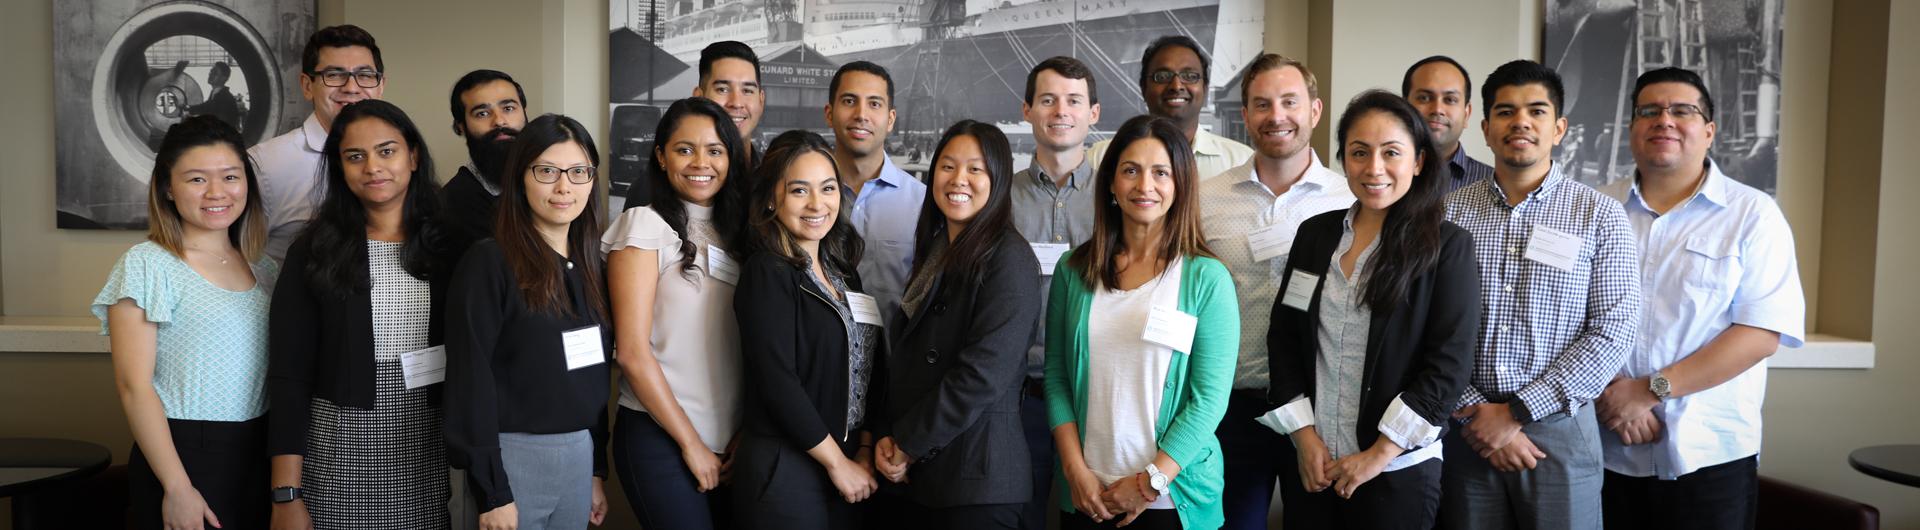 Fall 2018 Incoming MBA Students in Business